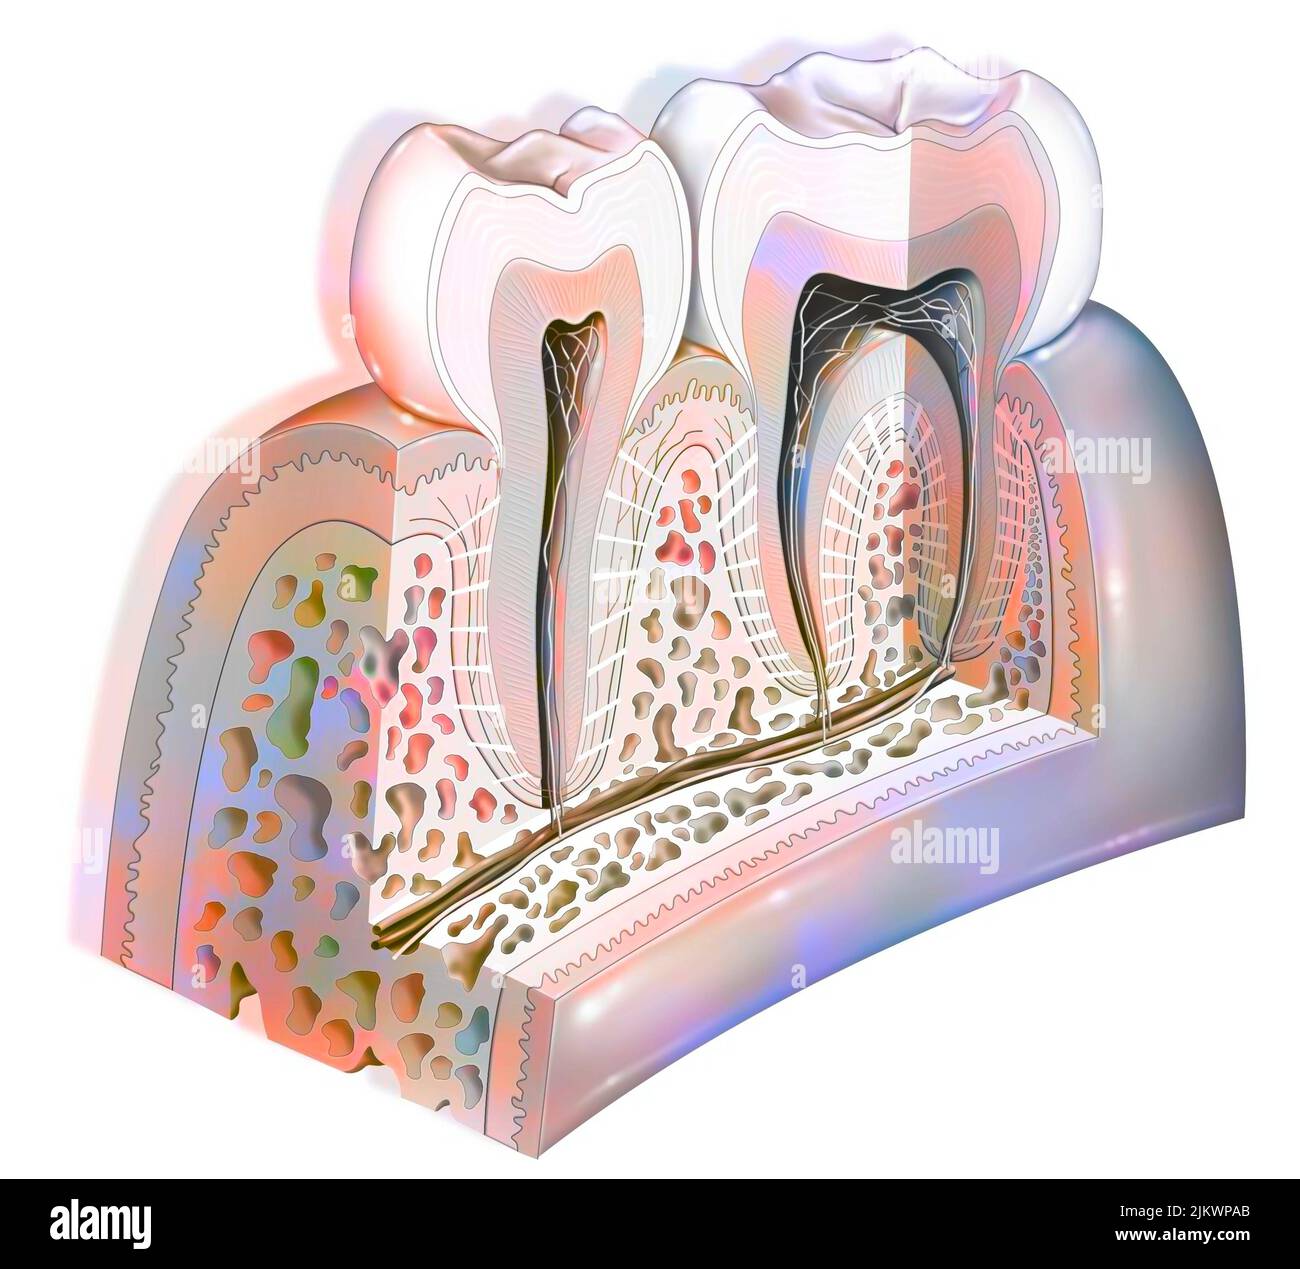 Anatomy of the tooth showing the enamel, dentin, pulp. Stock Photo